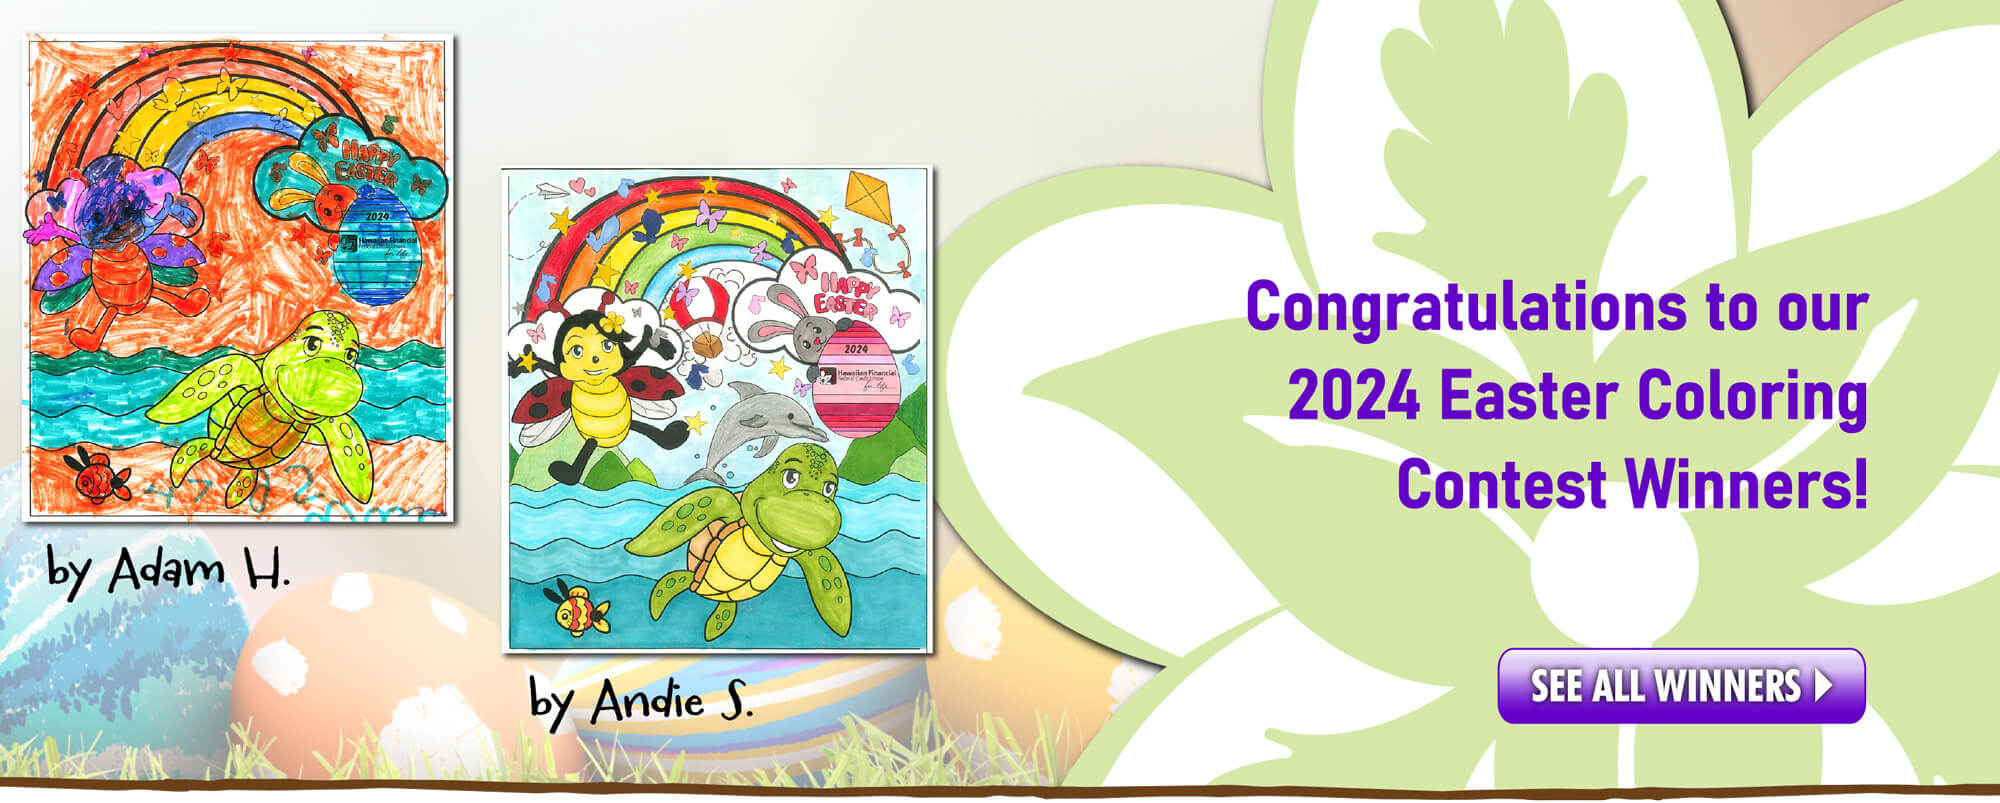 Congratulations to all of our 2024 Easter Coloring Contest Winners!